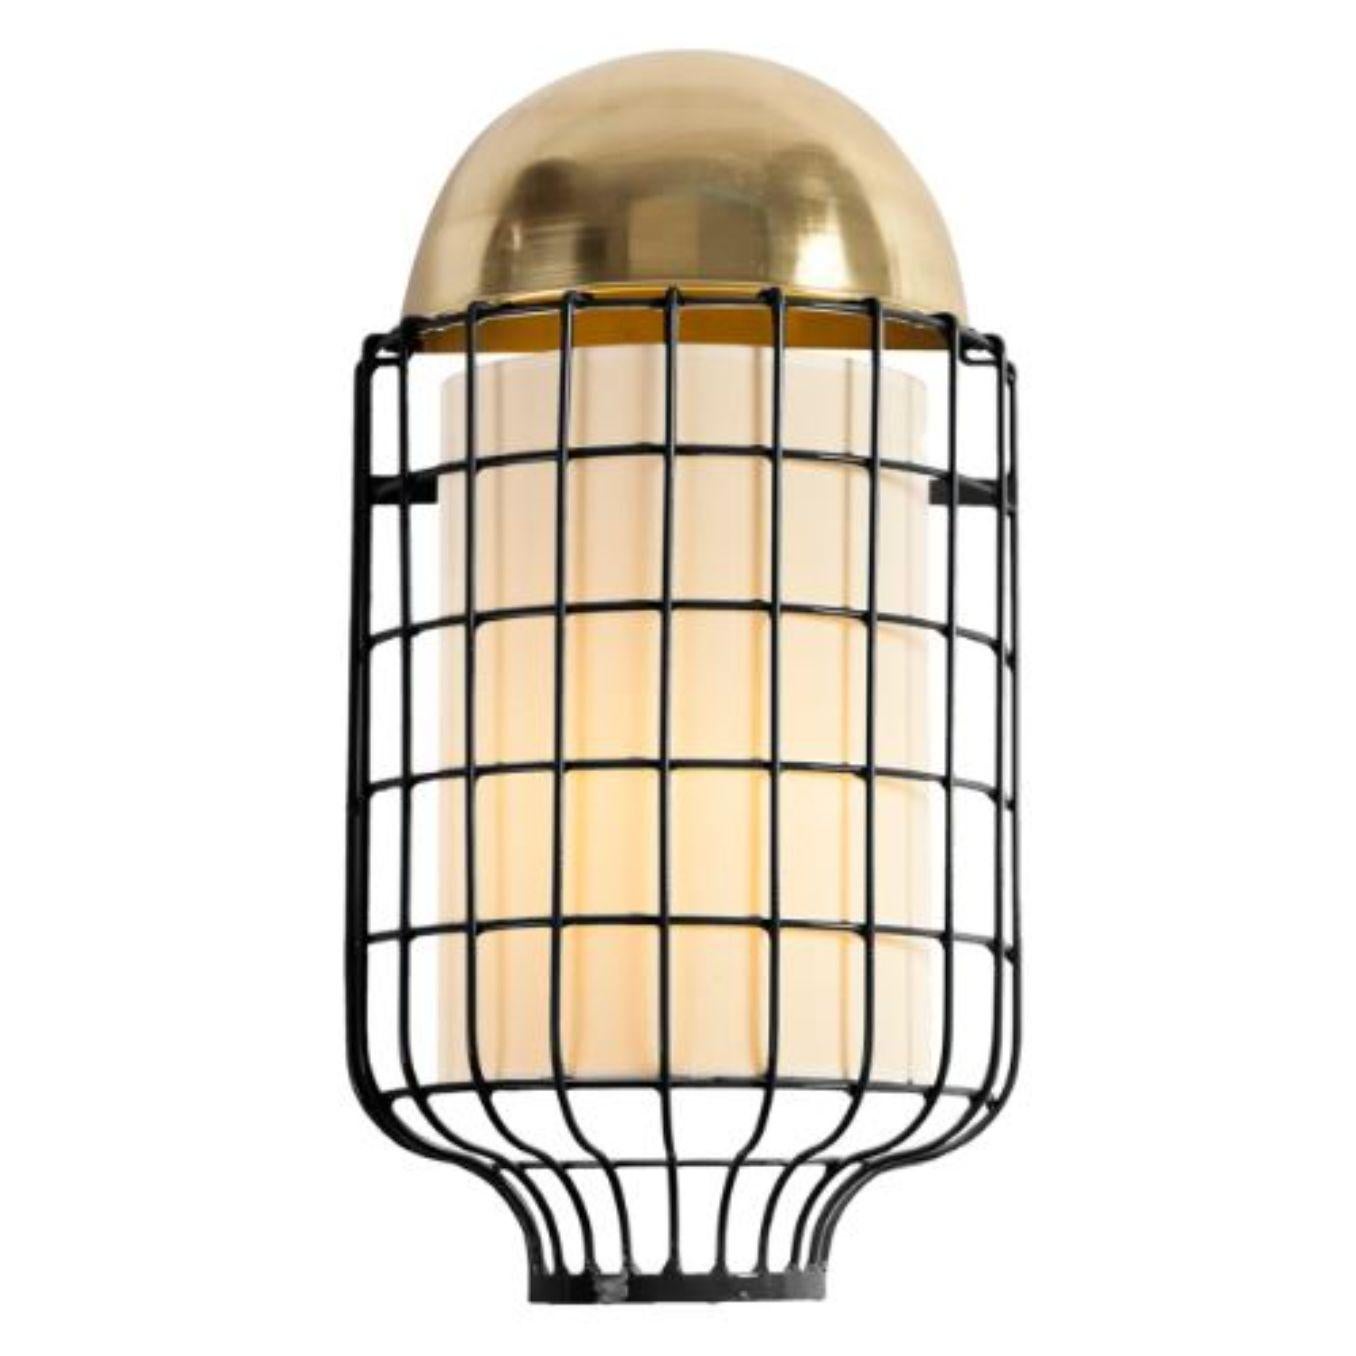 Brass Magnolia wall lamp by Dooq
Dimensions: W 30 x D 13 x H 56 cm
Materials: lacquered metal, polished or brushed metal, brass.
abat-jour: cotton
Also available in different colours and materials.

Information:
230V/50Hz
E14/1x15W